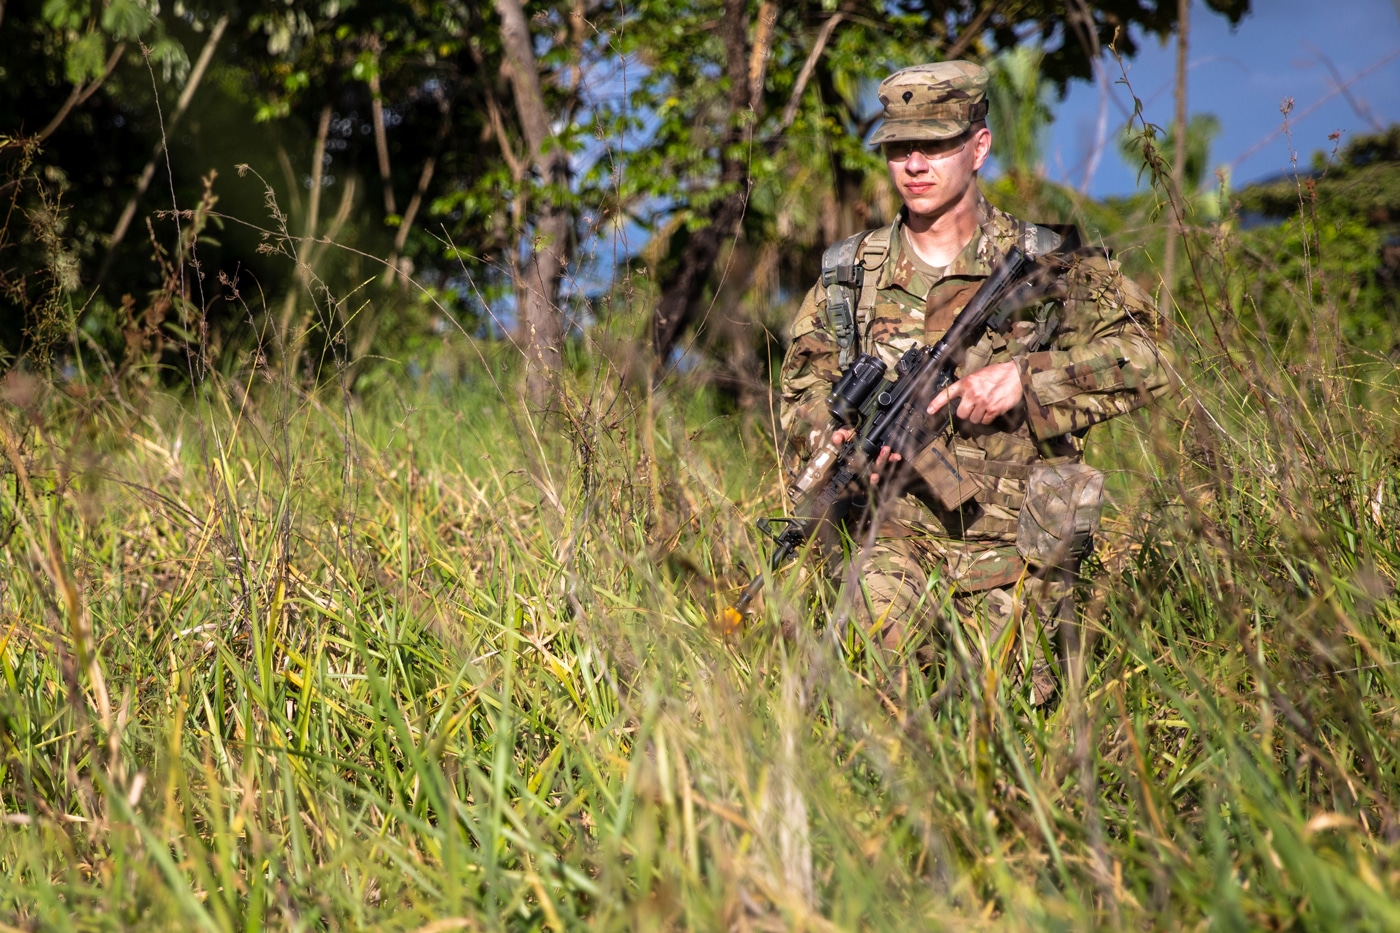 This U.S. Army soldier patrols in the country of Columbia, South America. Situational awareness on patrol is important for surviving a dangerous situation.